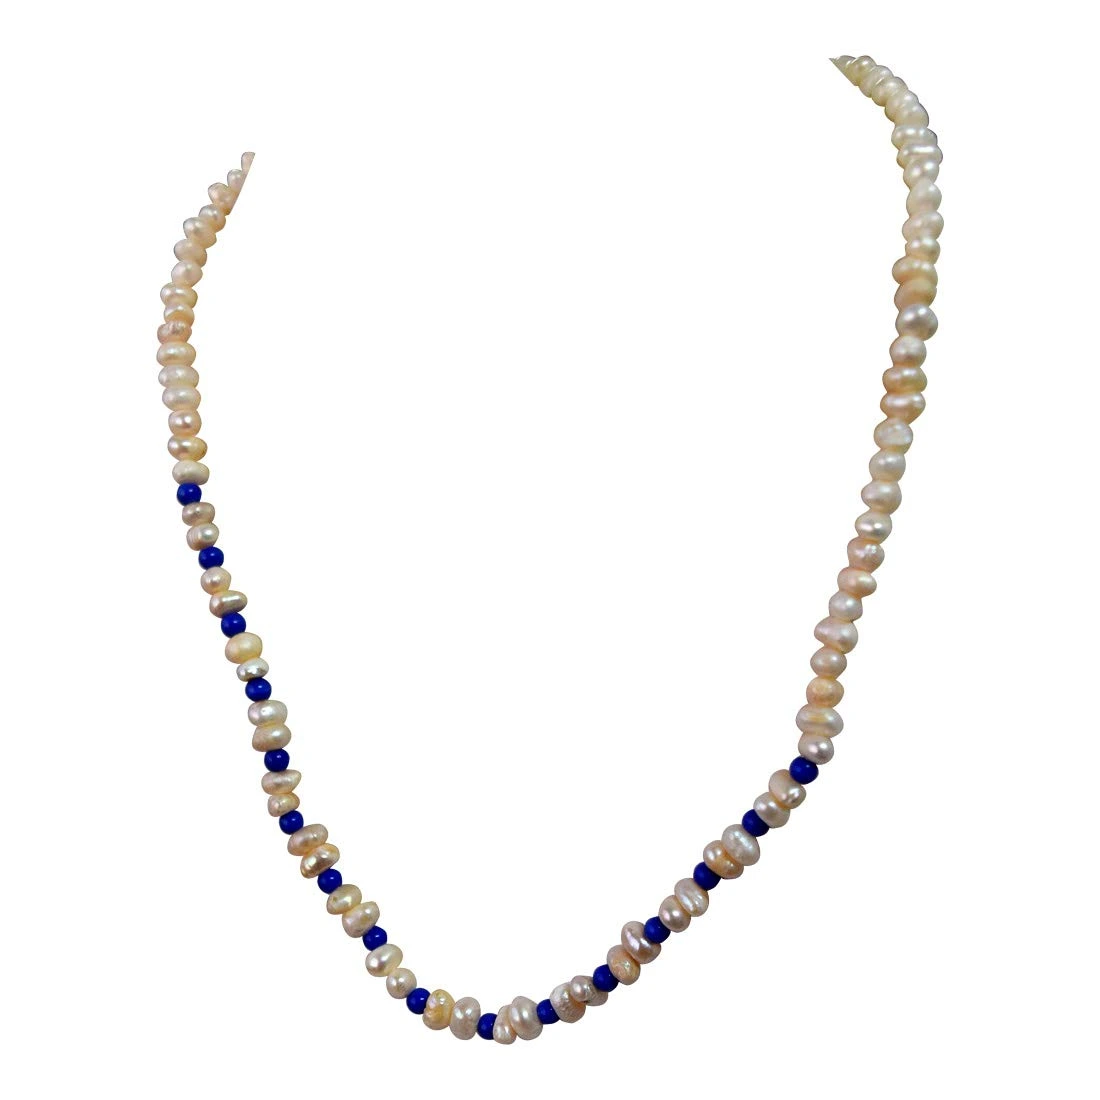 Single Line Real Freshwater Pearl & Blue Beads Necklace for Women (SN960)